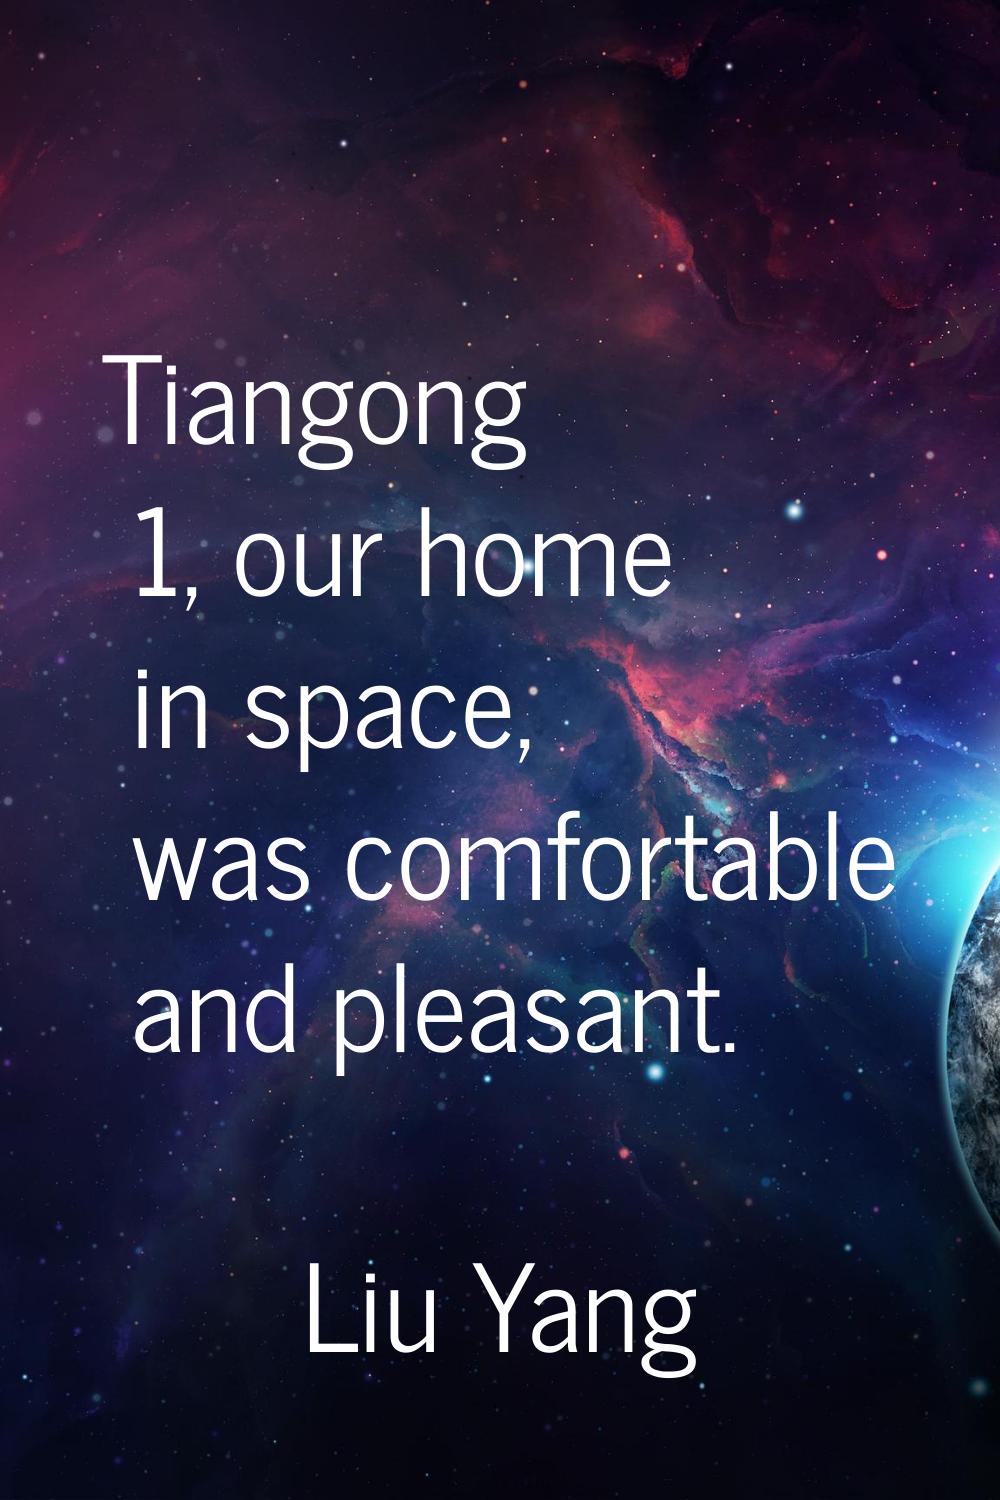 Tiangong 1, our home in space, was comfortable and pleasant.